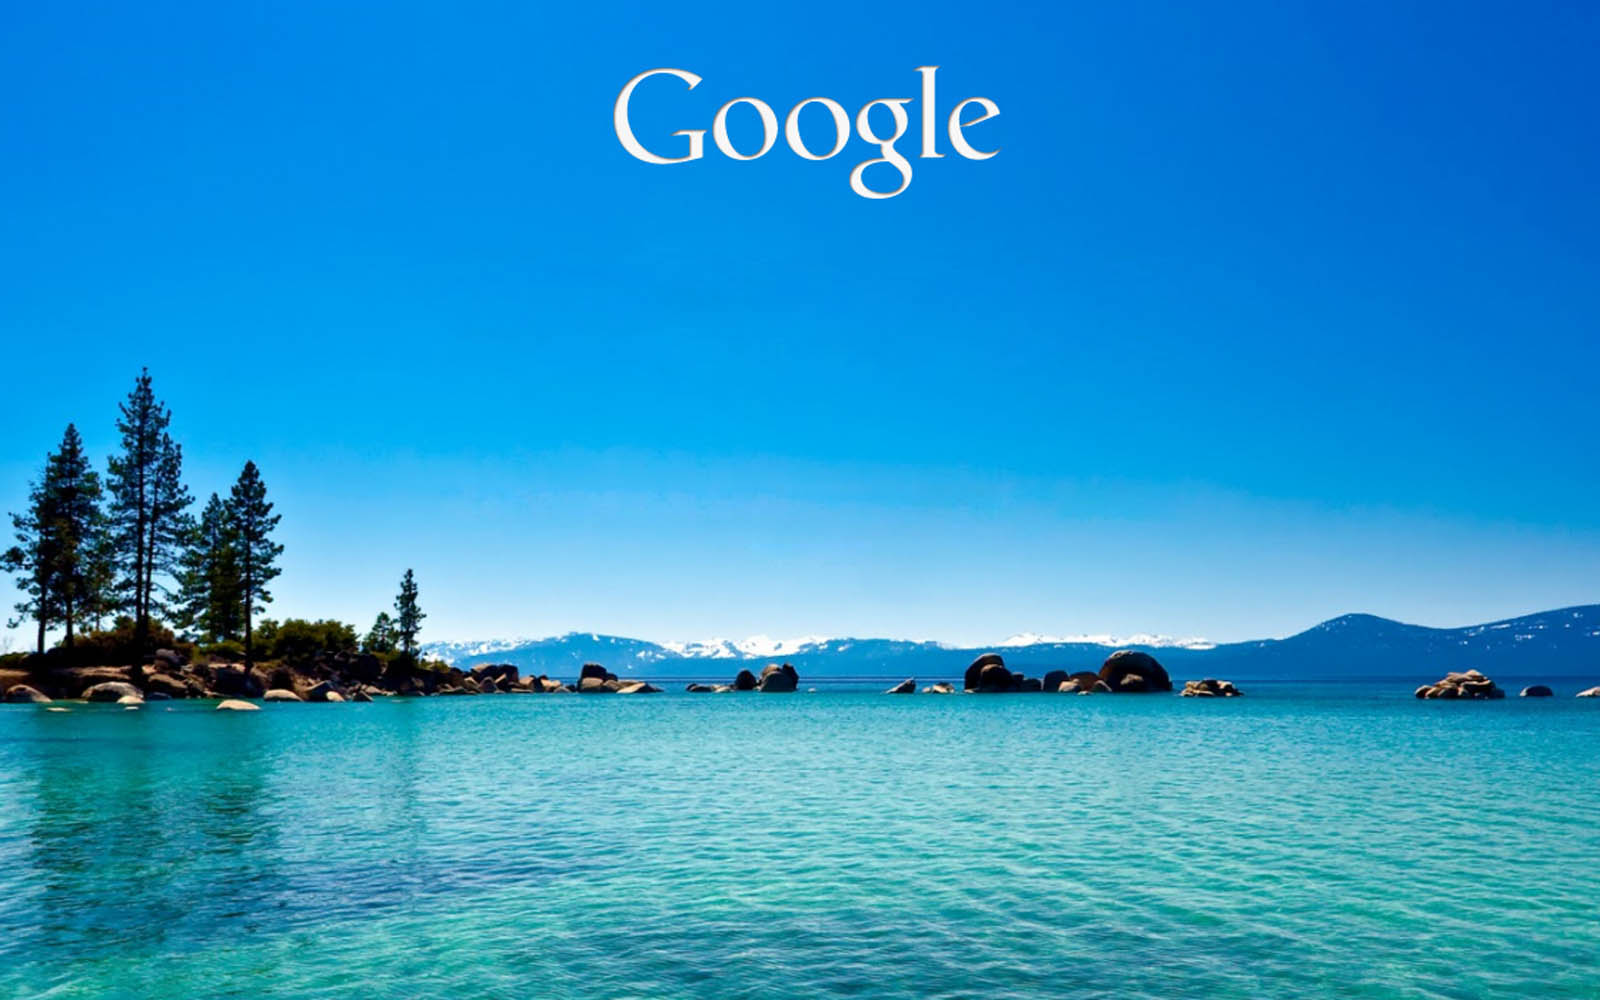 Google Background Wallpaper Photos Pictures And Image For